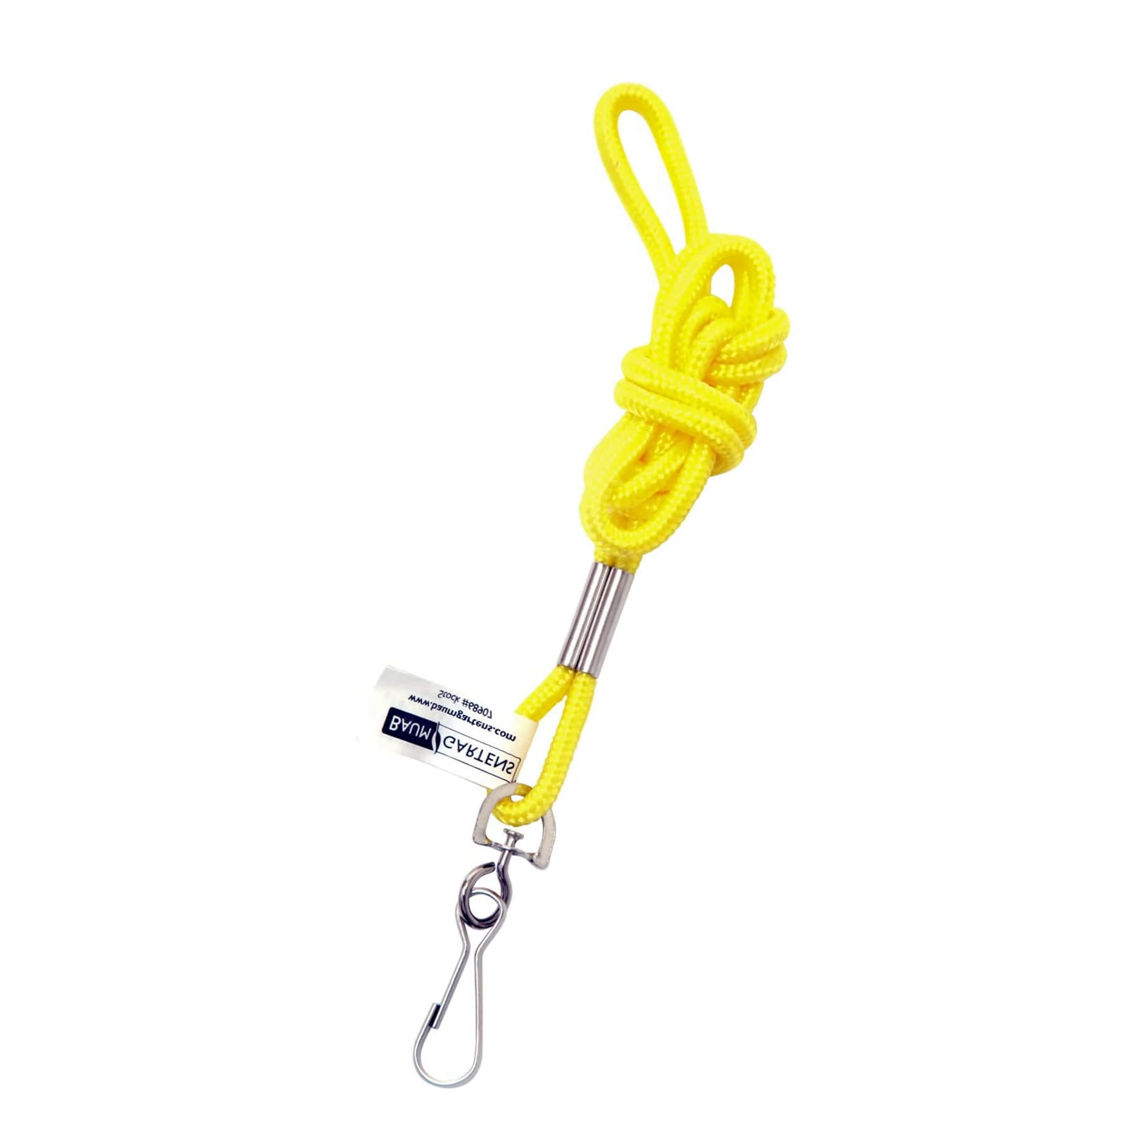 SICURIX Standard Lanyard Hook Rope Style, Yellow, Pack of 24 - Image 3 of 3